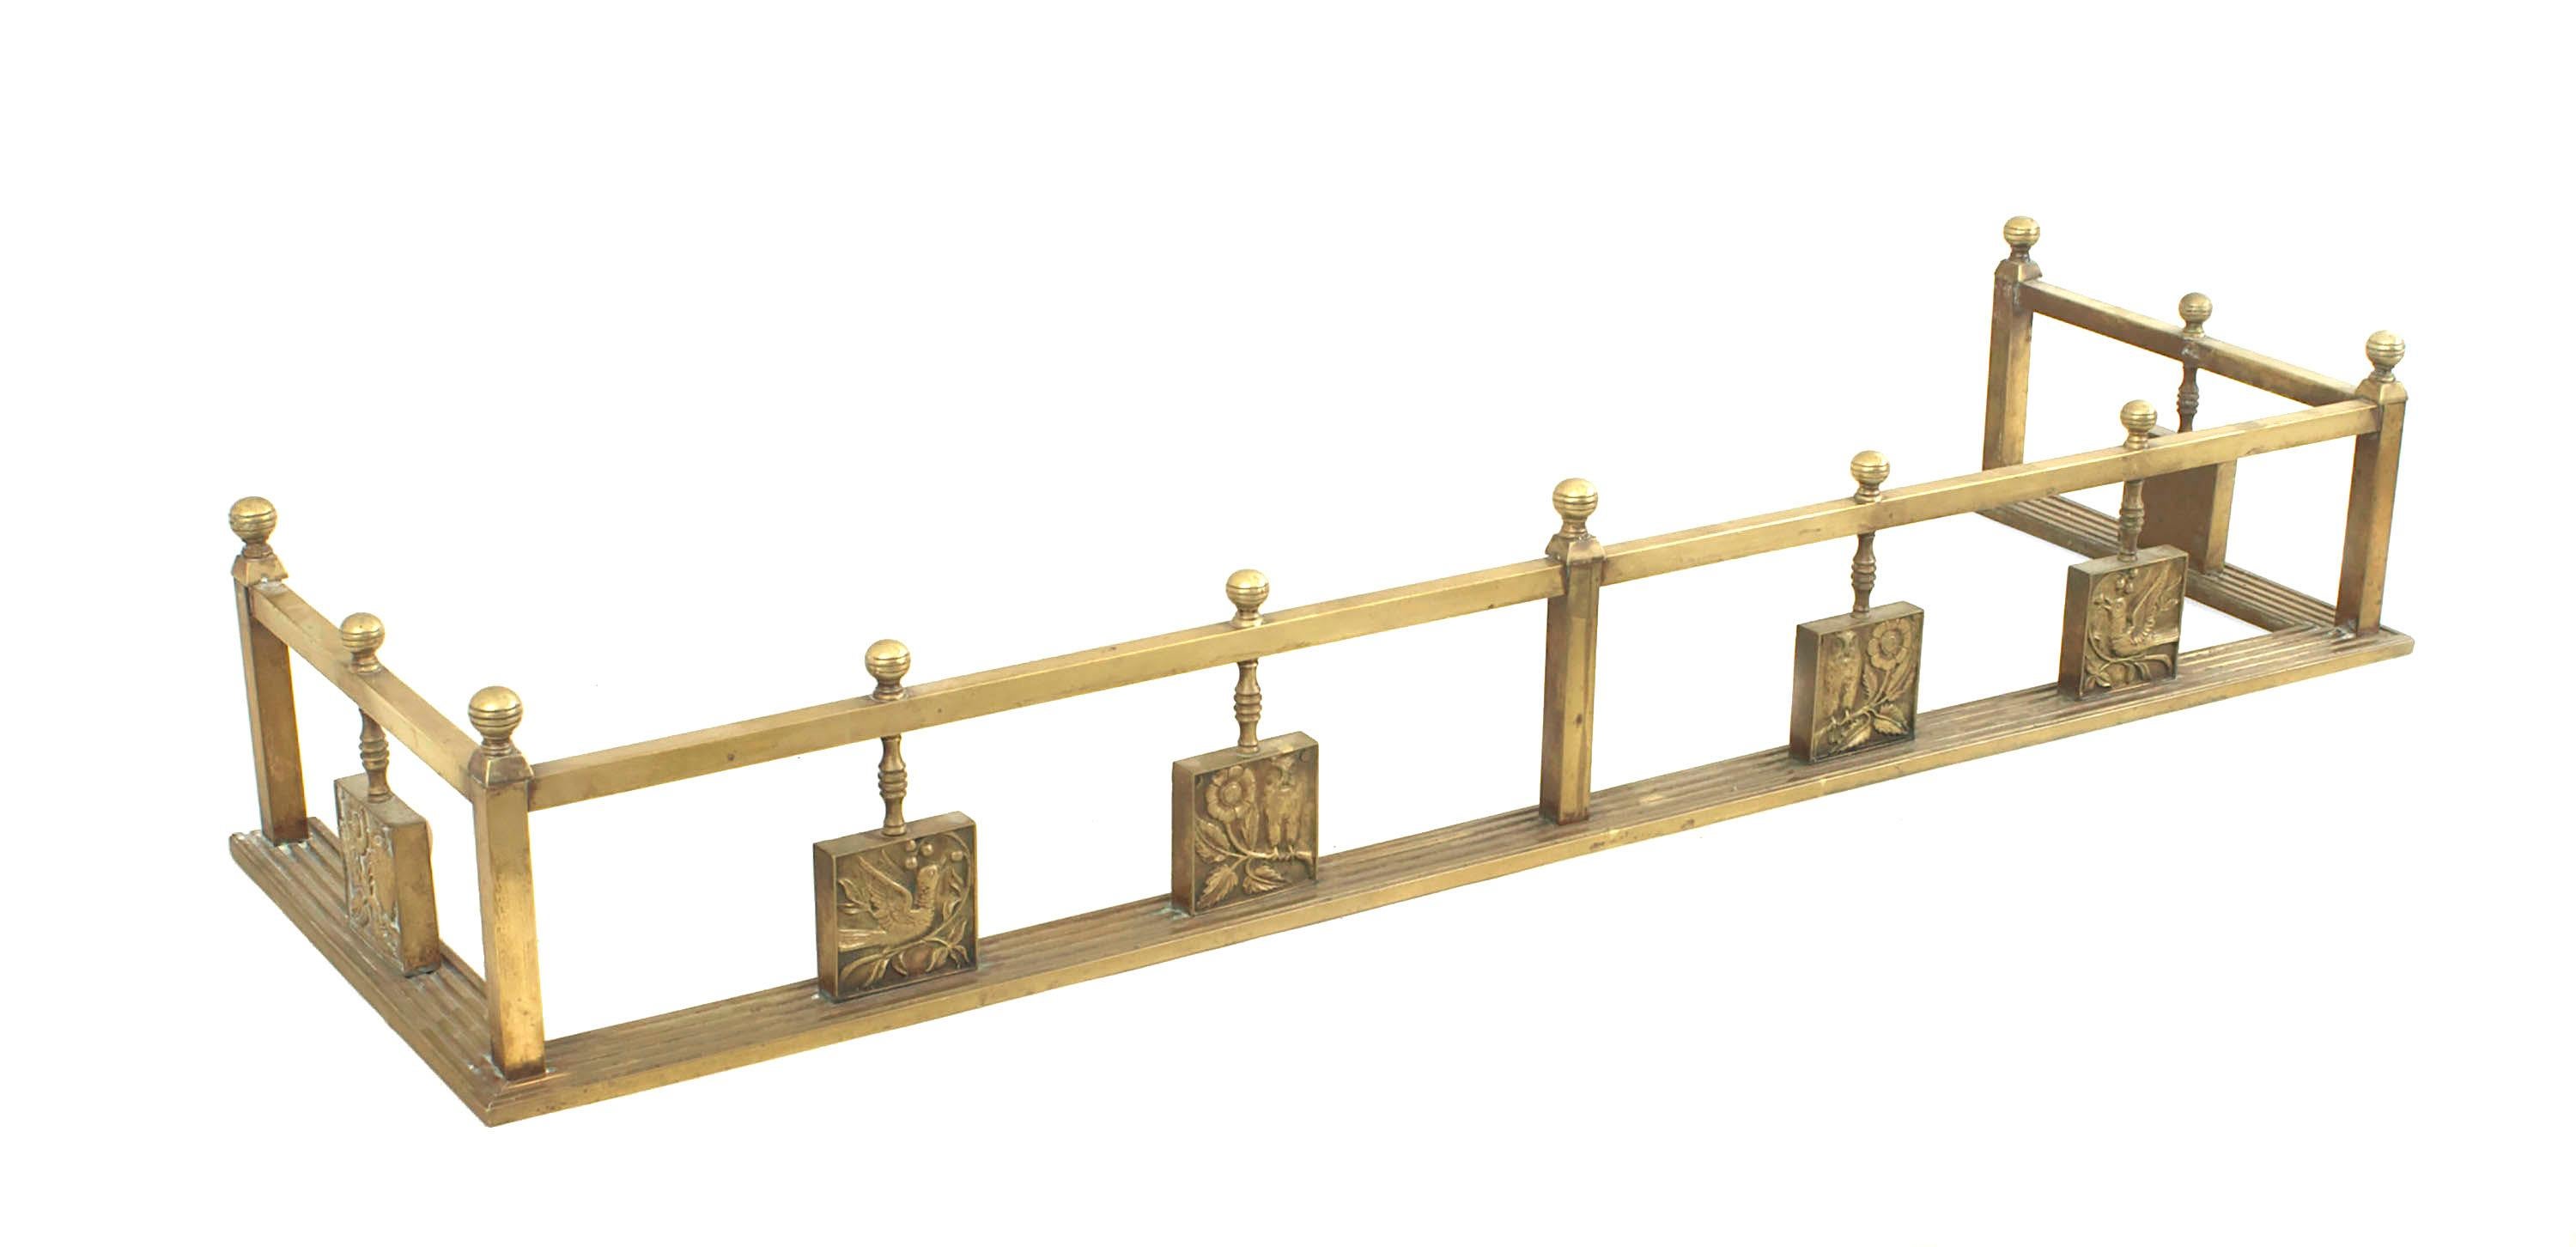 English Aesthetic Movement brass fire place fender with 6 panels showing different breeds of birds.
